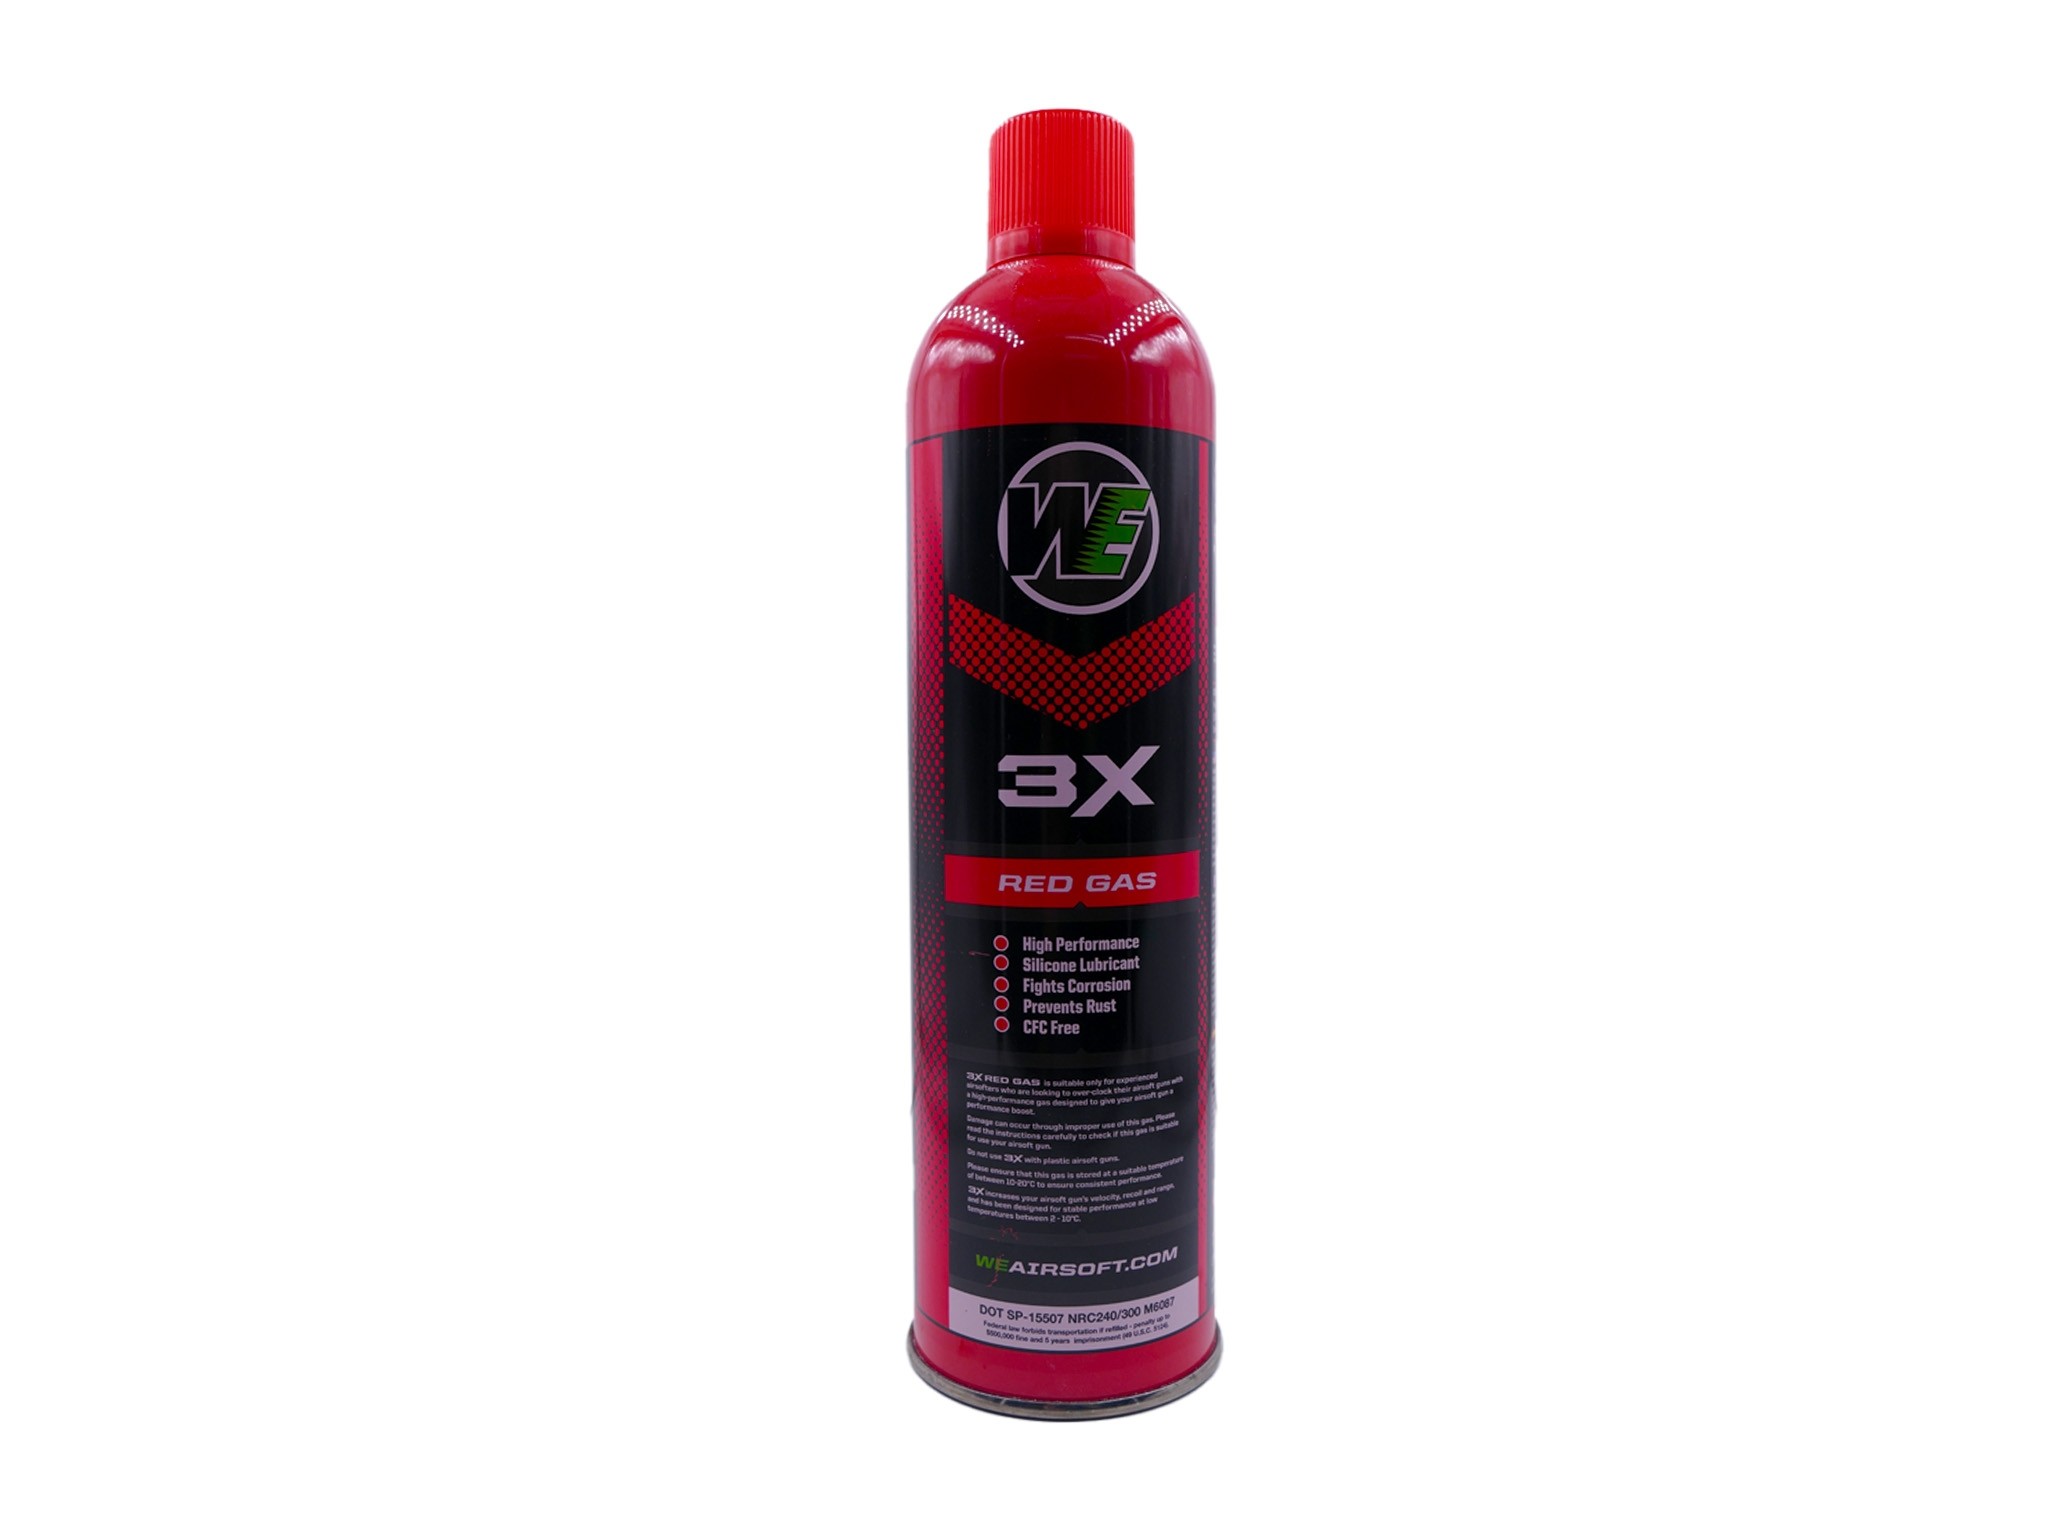 WE Airsoft Premium "3X" High Performance Red Gas